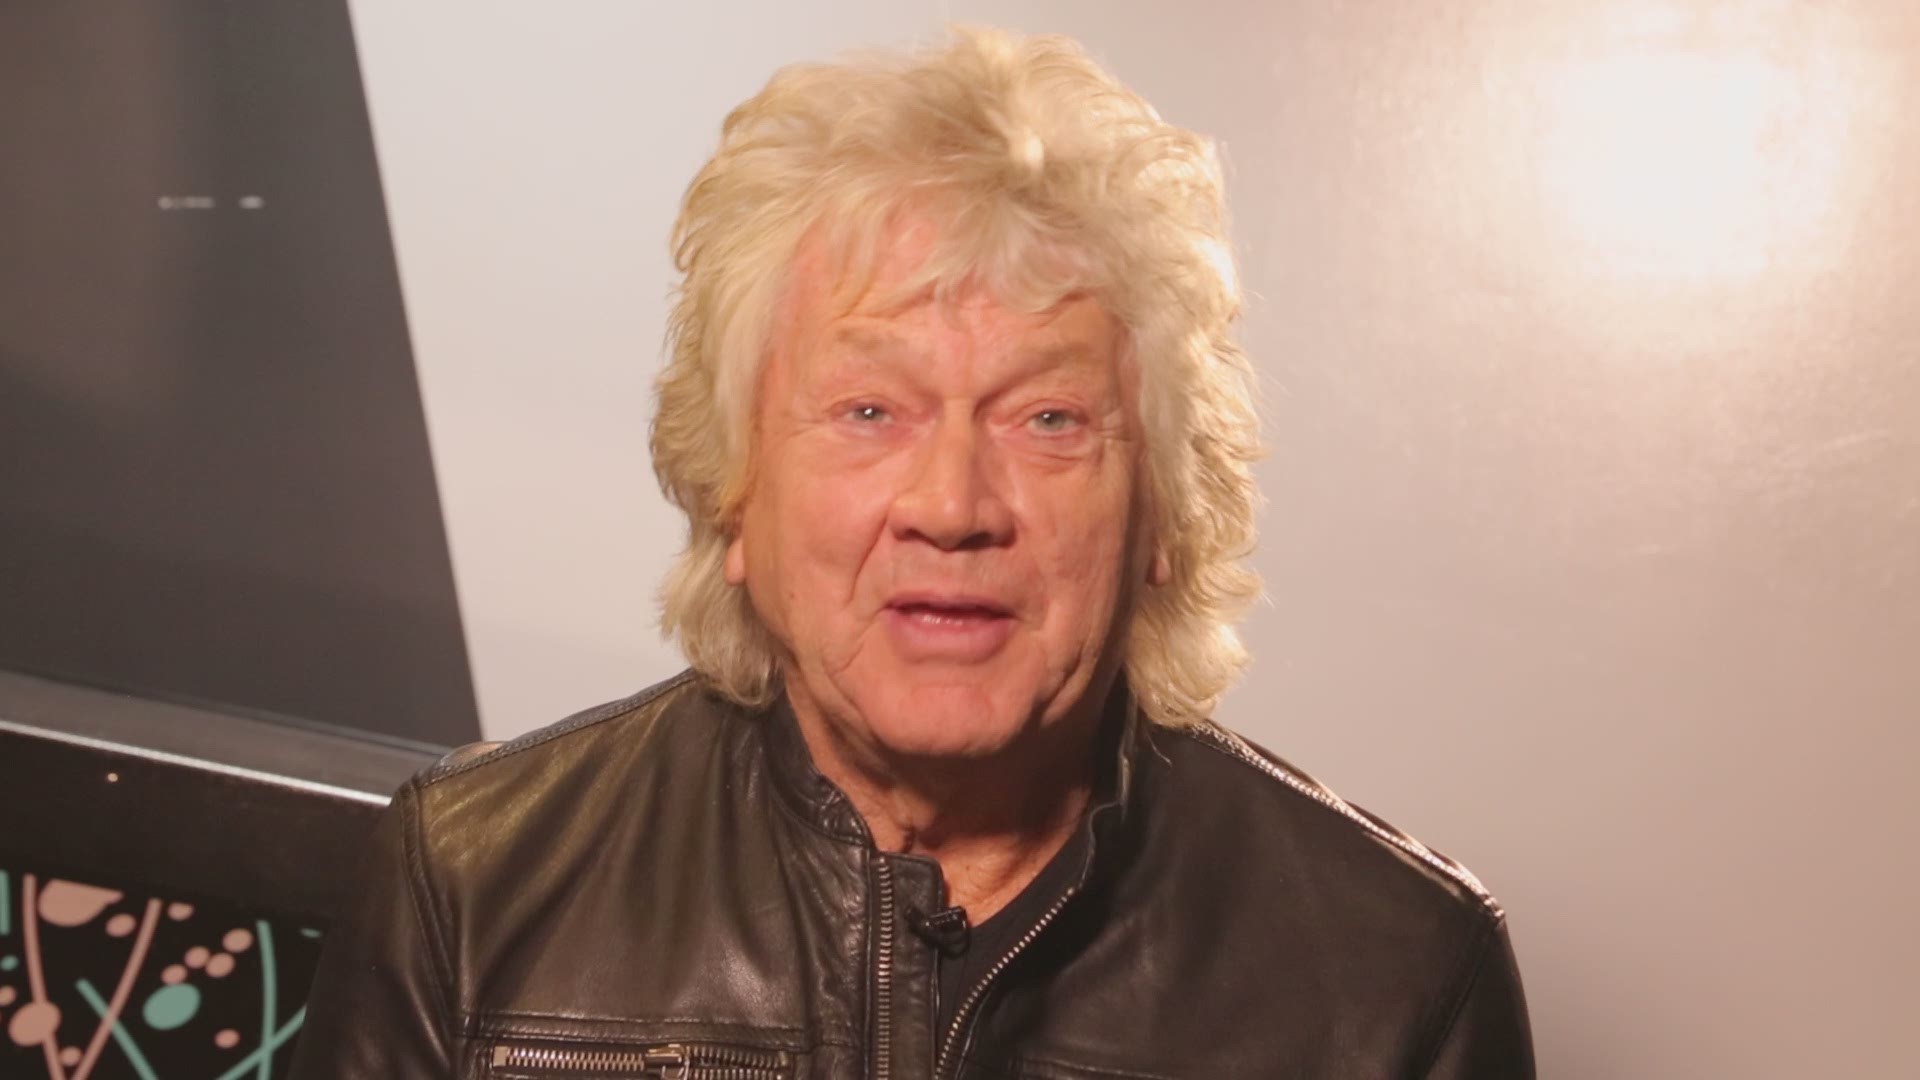 John Lodge of The Moody Blues reflects on Rock Hall induction, his influences, and solo tour